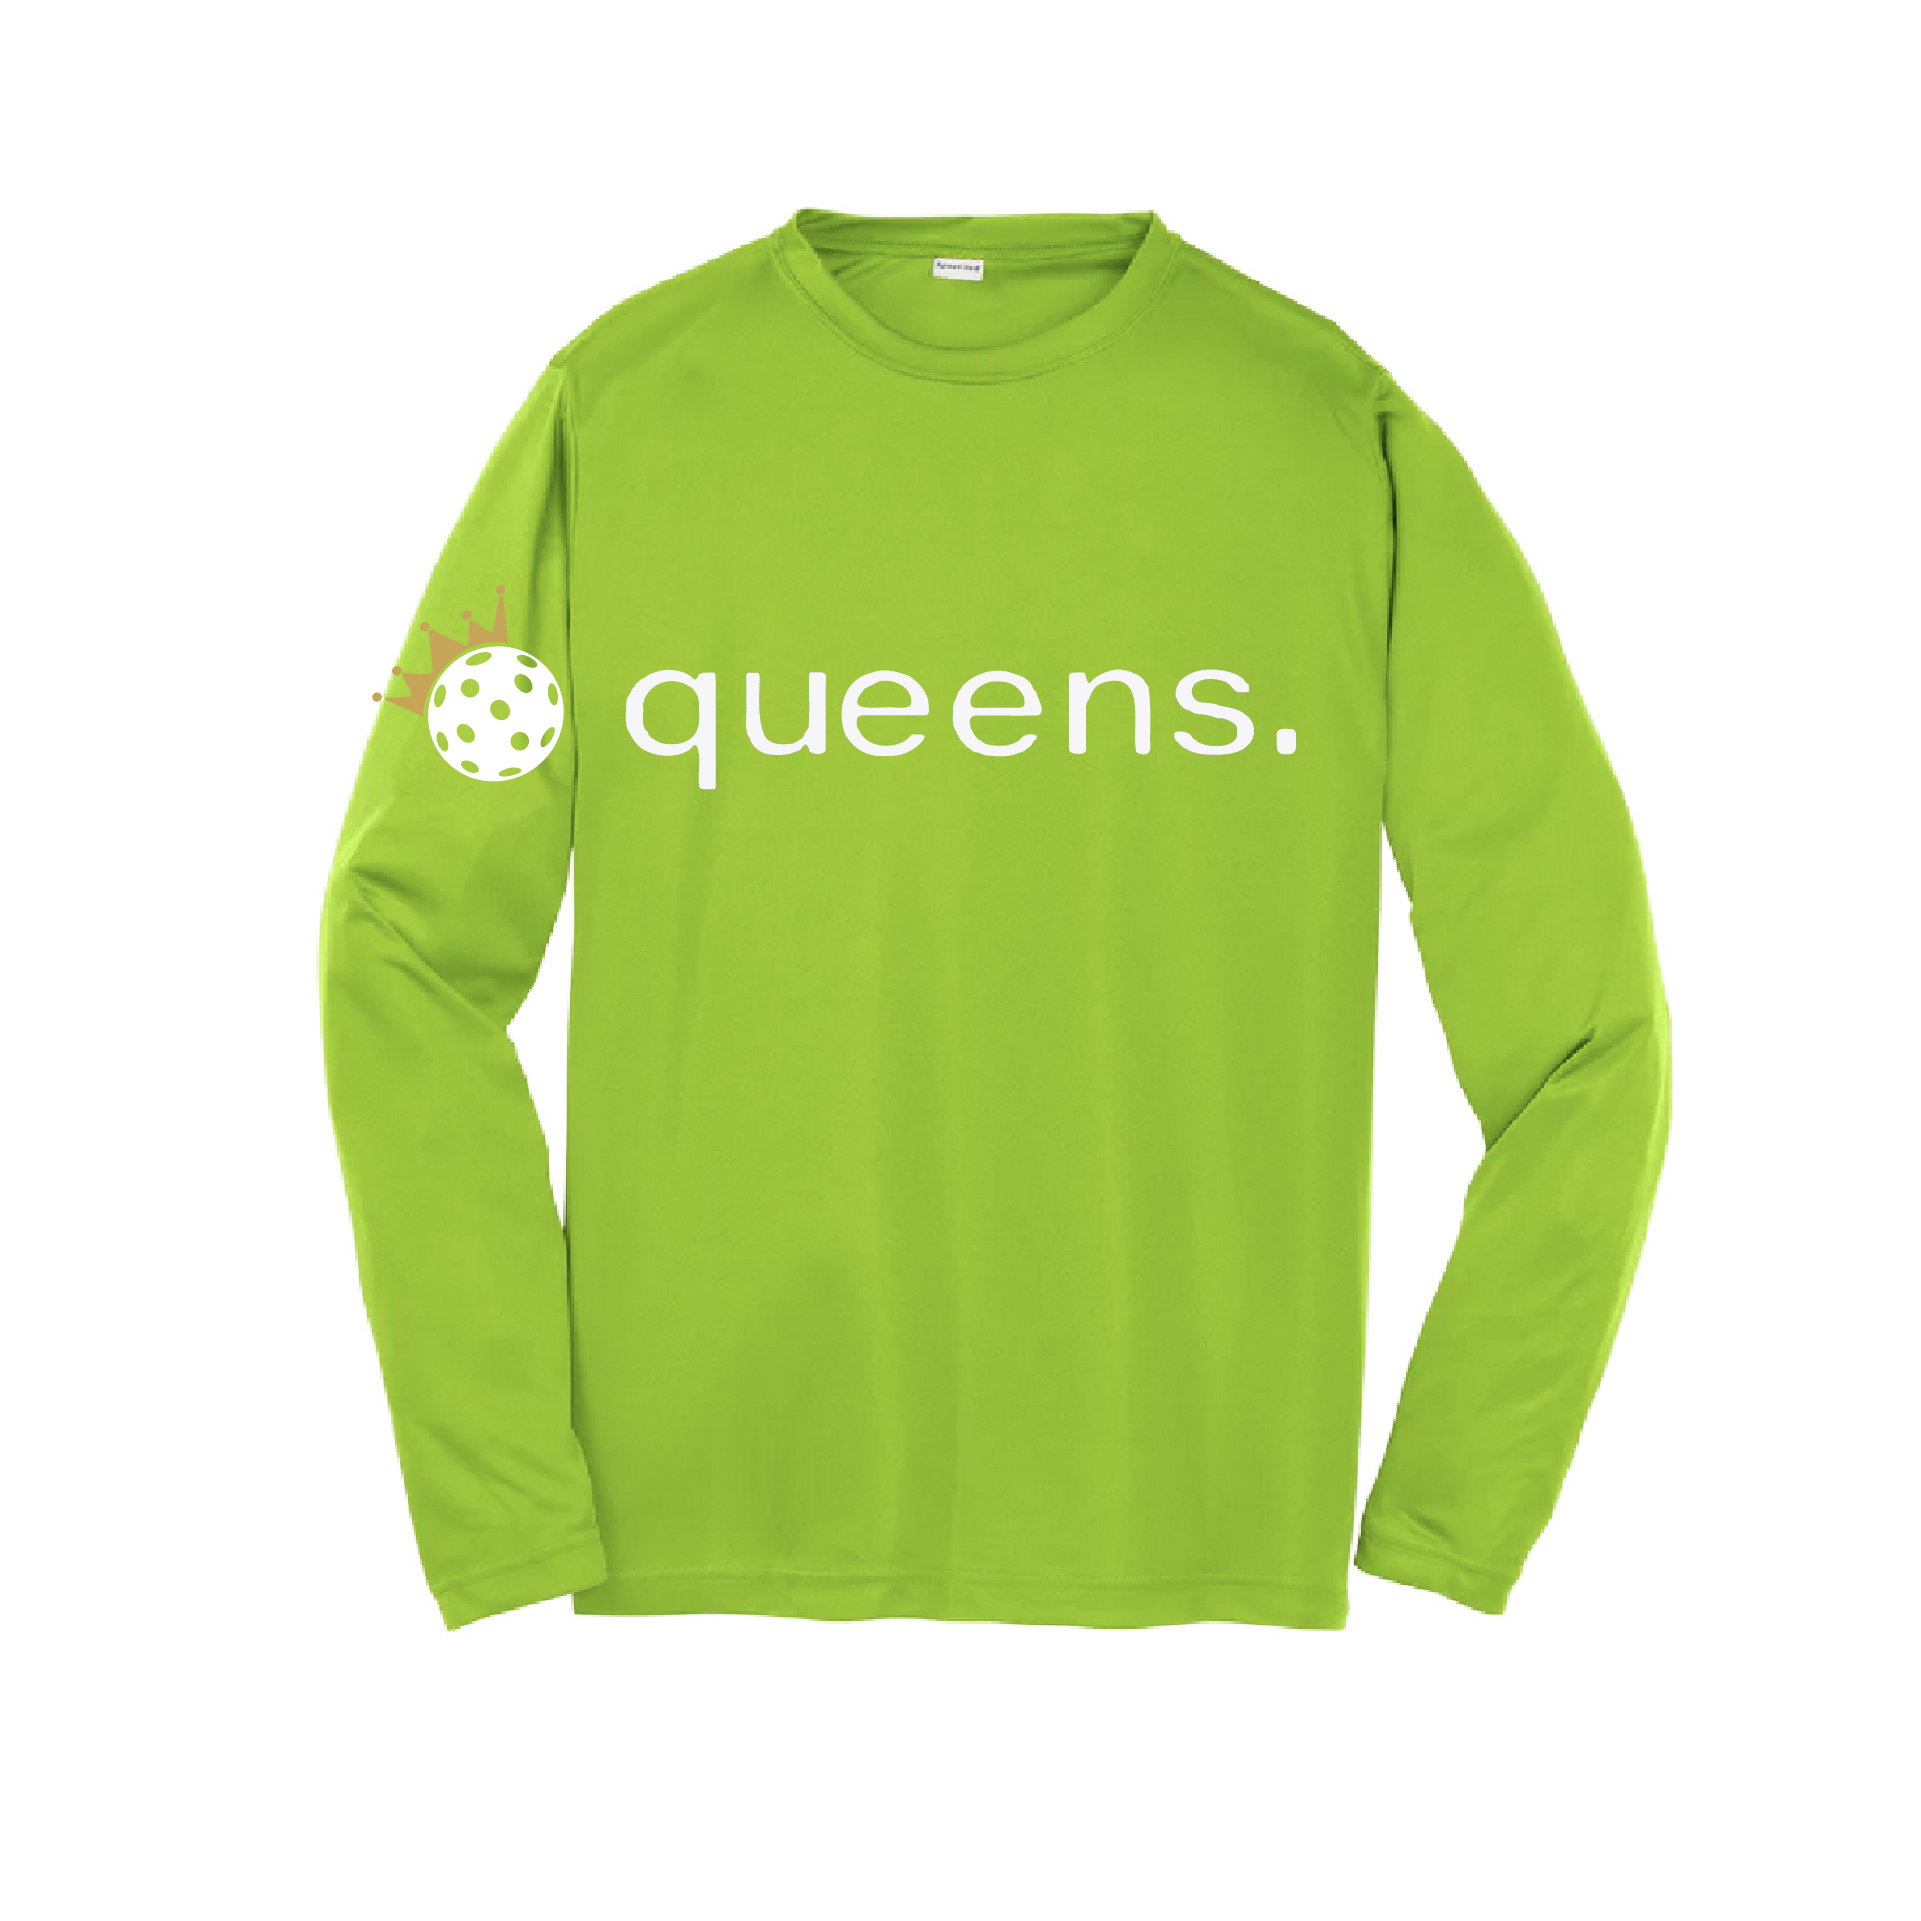 Our Pickleball Queen and Crown Youth Long Sleeve Shirts are designed for all athletic activities. Lightweight and breathable, our shirts feature PosiCharge technology that locks in color and prevents logo fading. Comfortably designed, each shirt also features a removable tag and set-in sleeves. Our shirts are designed with the athlete in mind, providing a full range of motion and maximum breathability. 